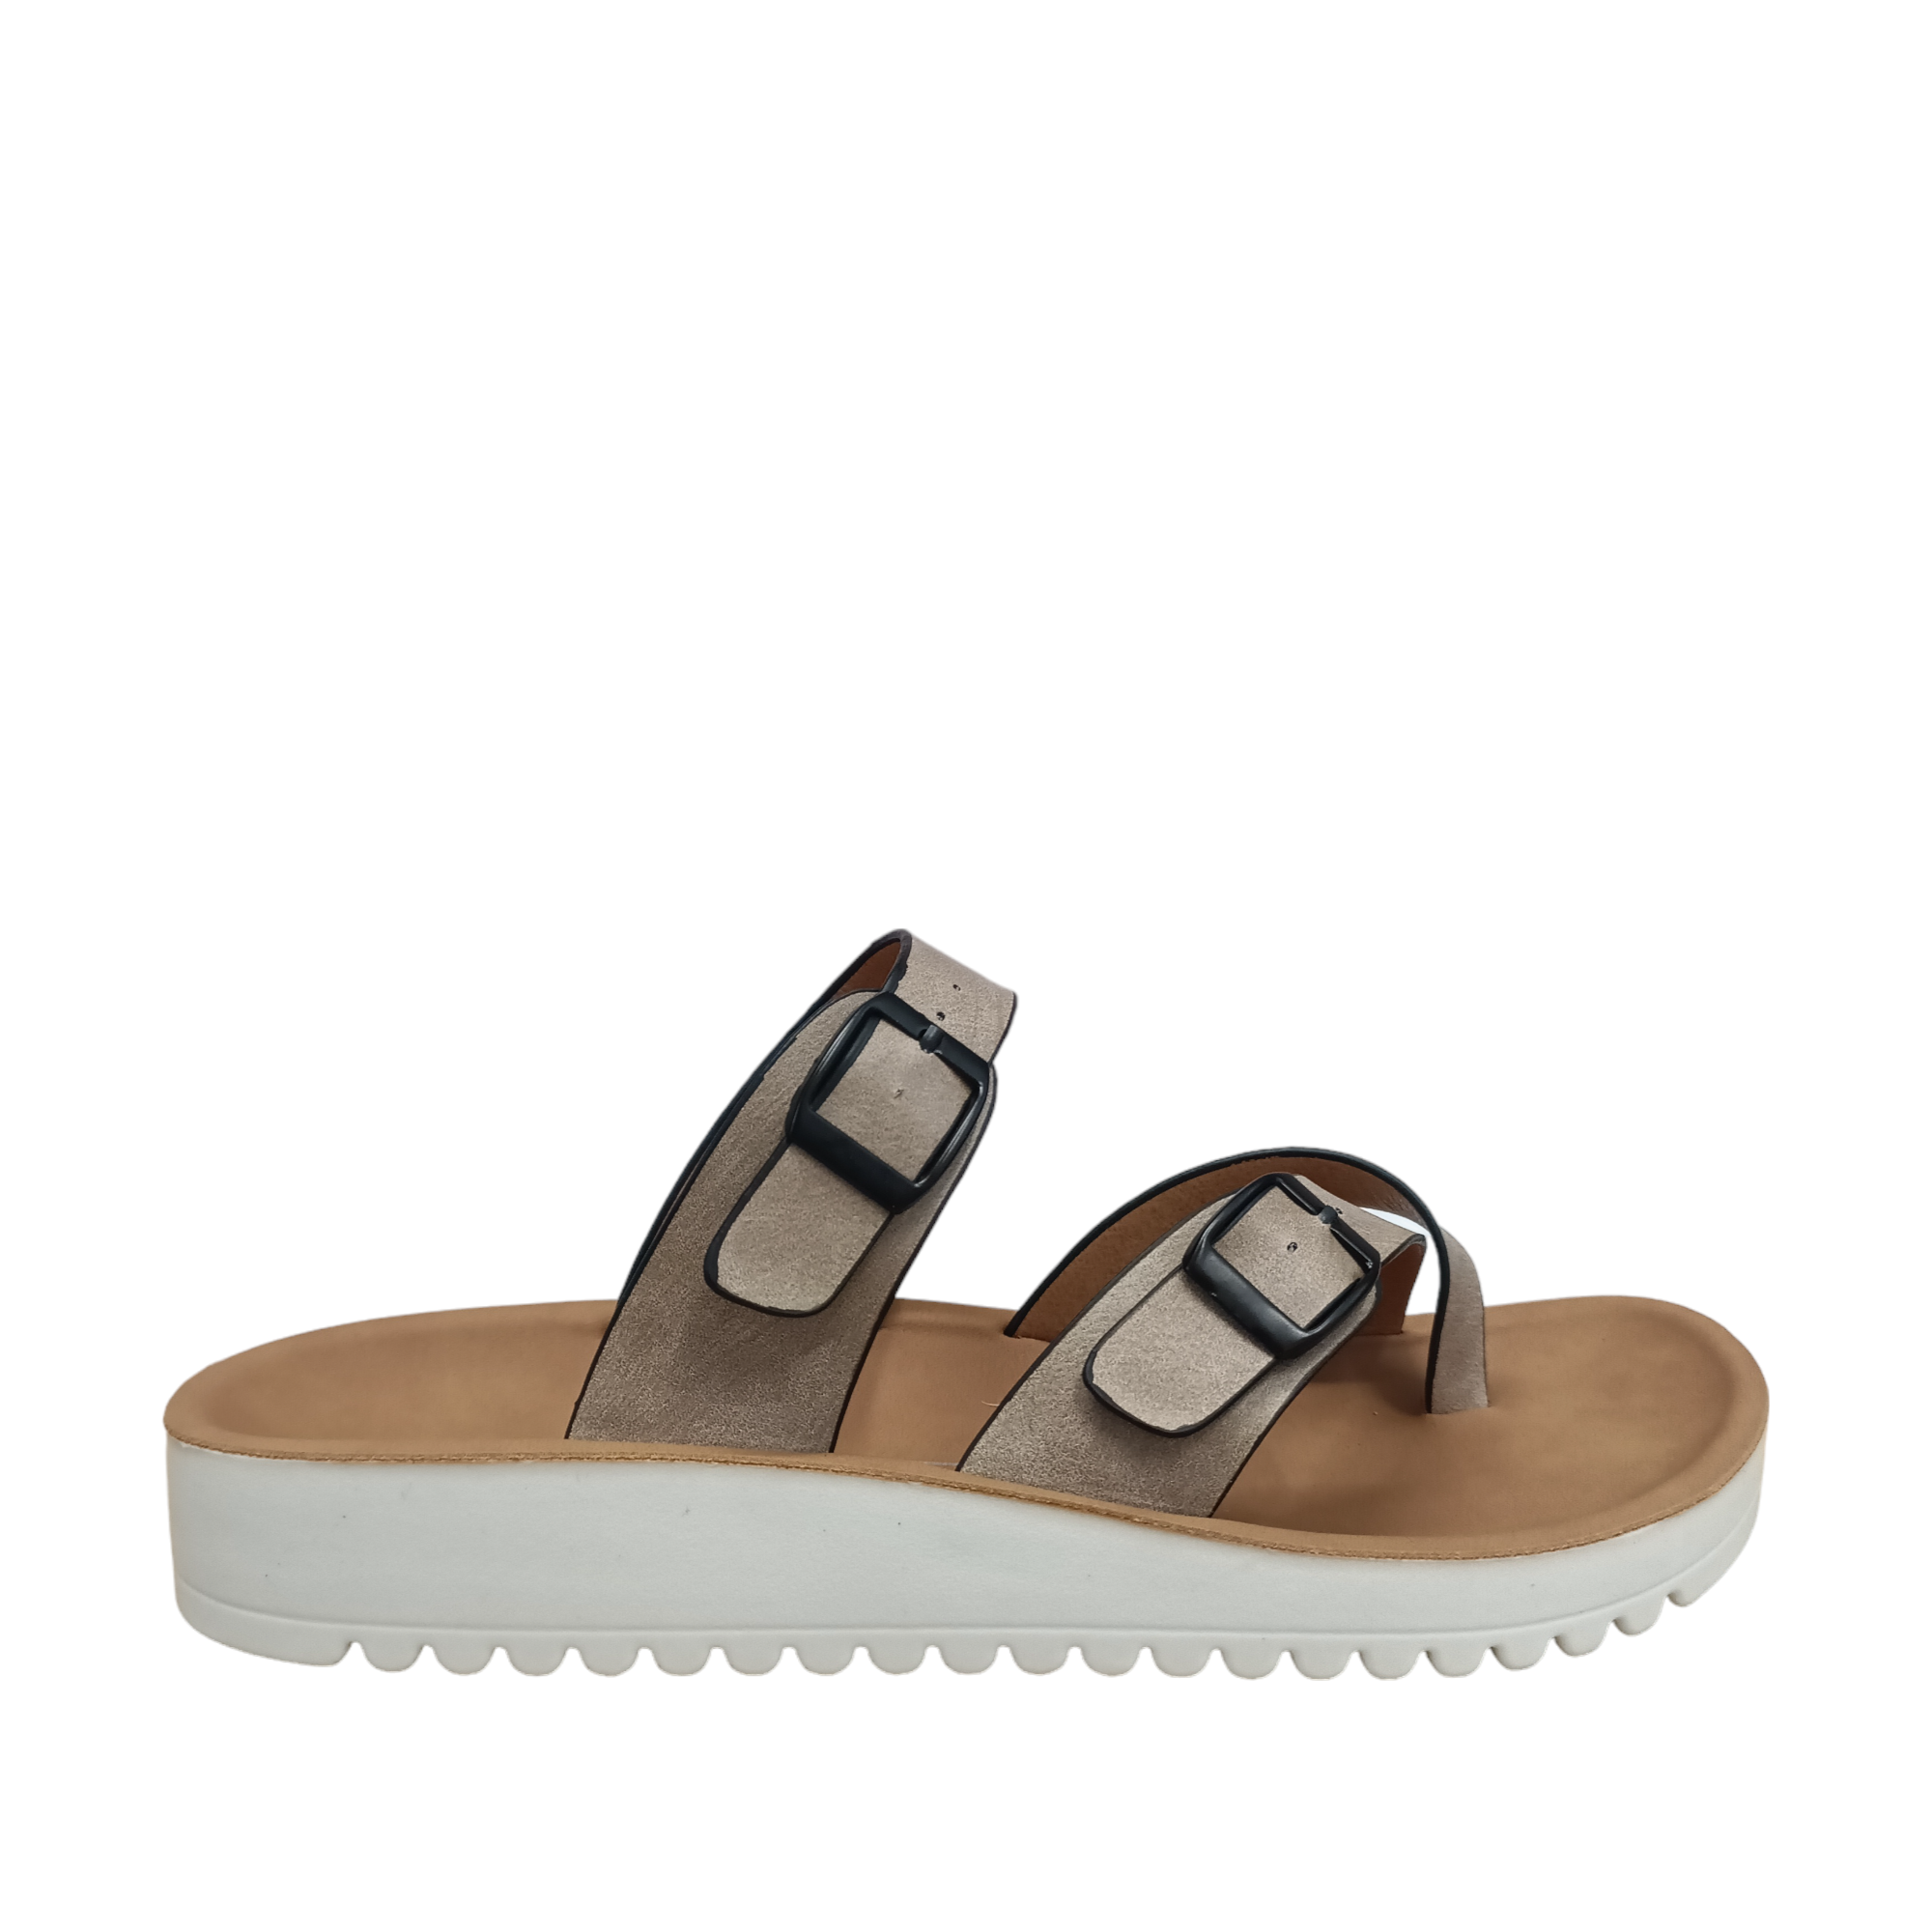 Nin - shoe&amp;me - Los Cabos - Jandals - Jandal, Summer, Womens